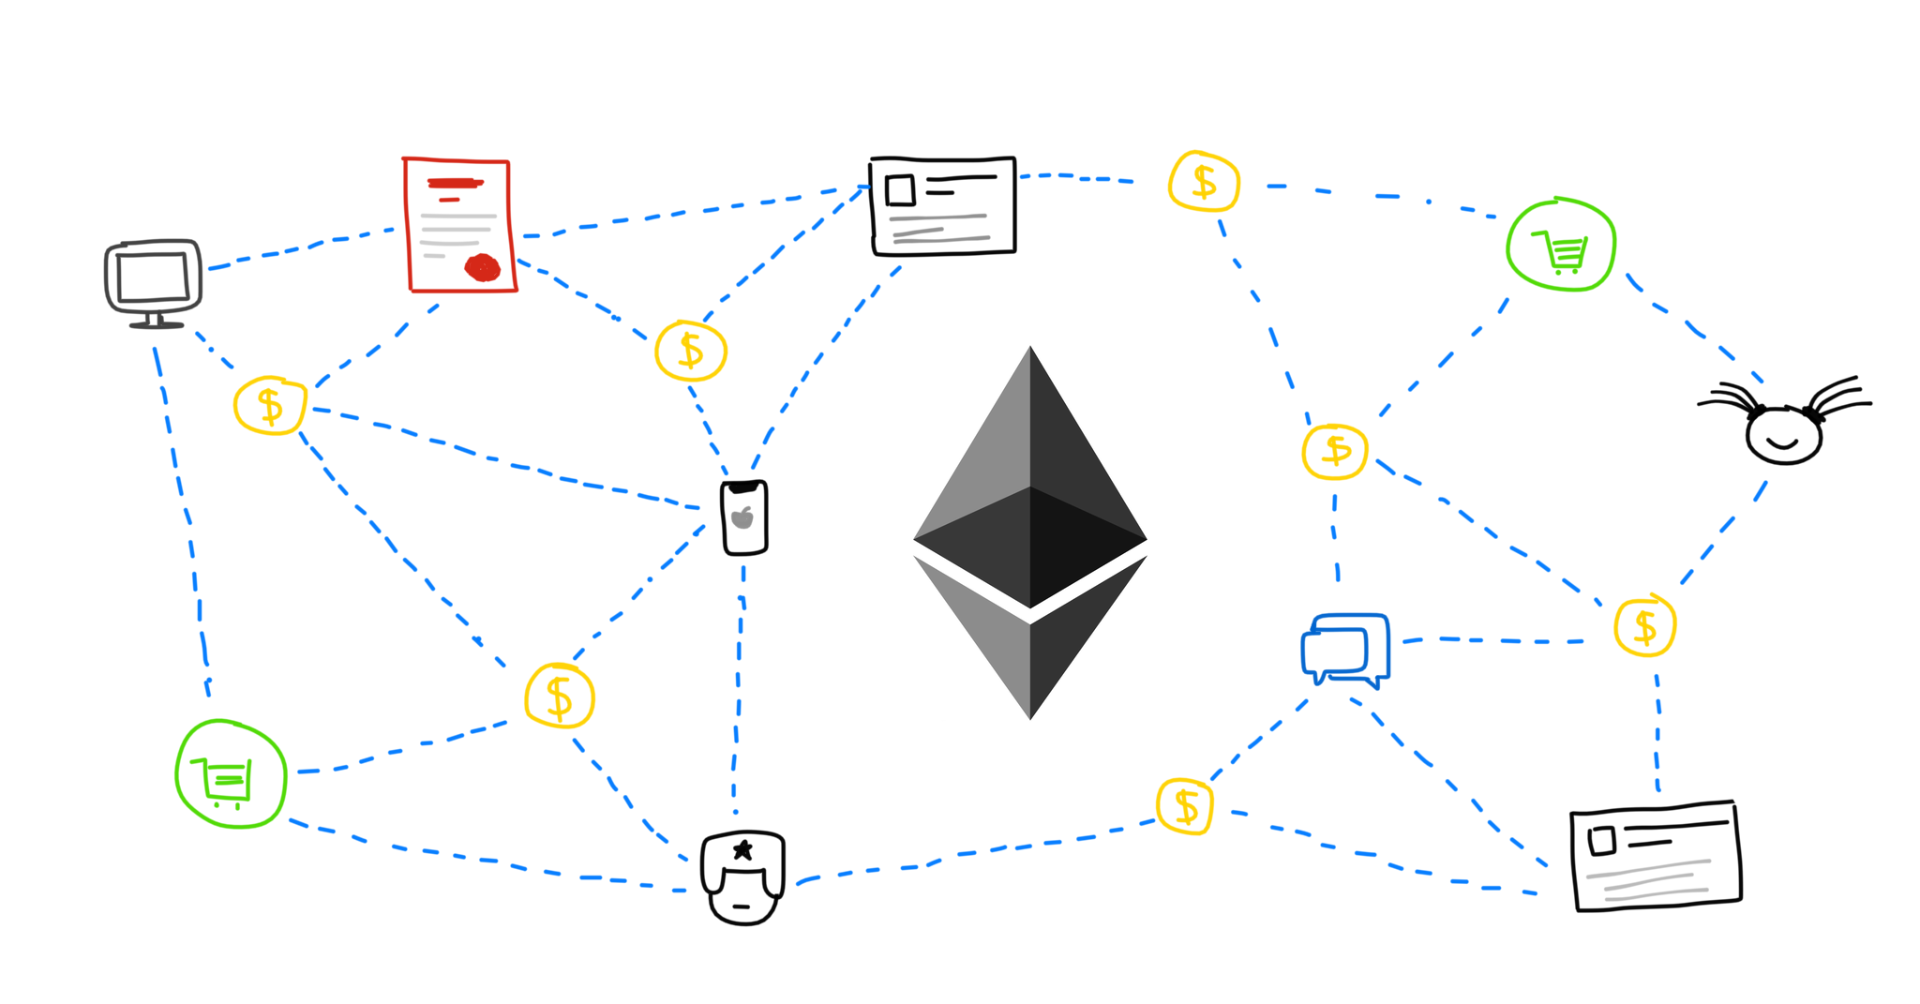 ethereum discussion forums